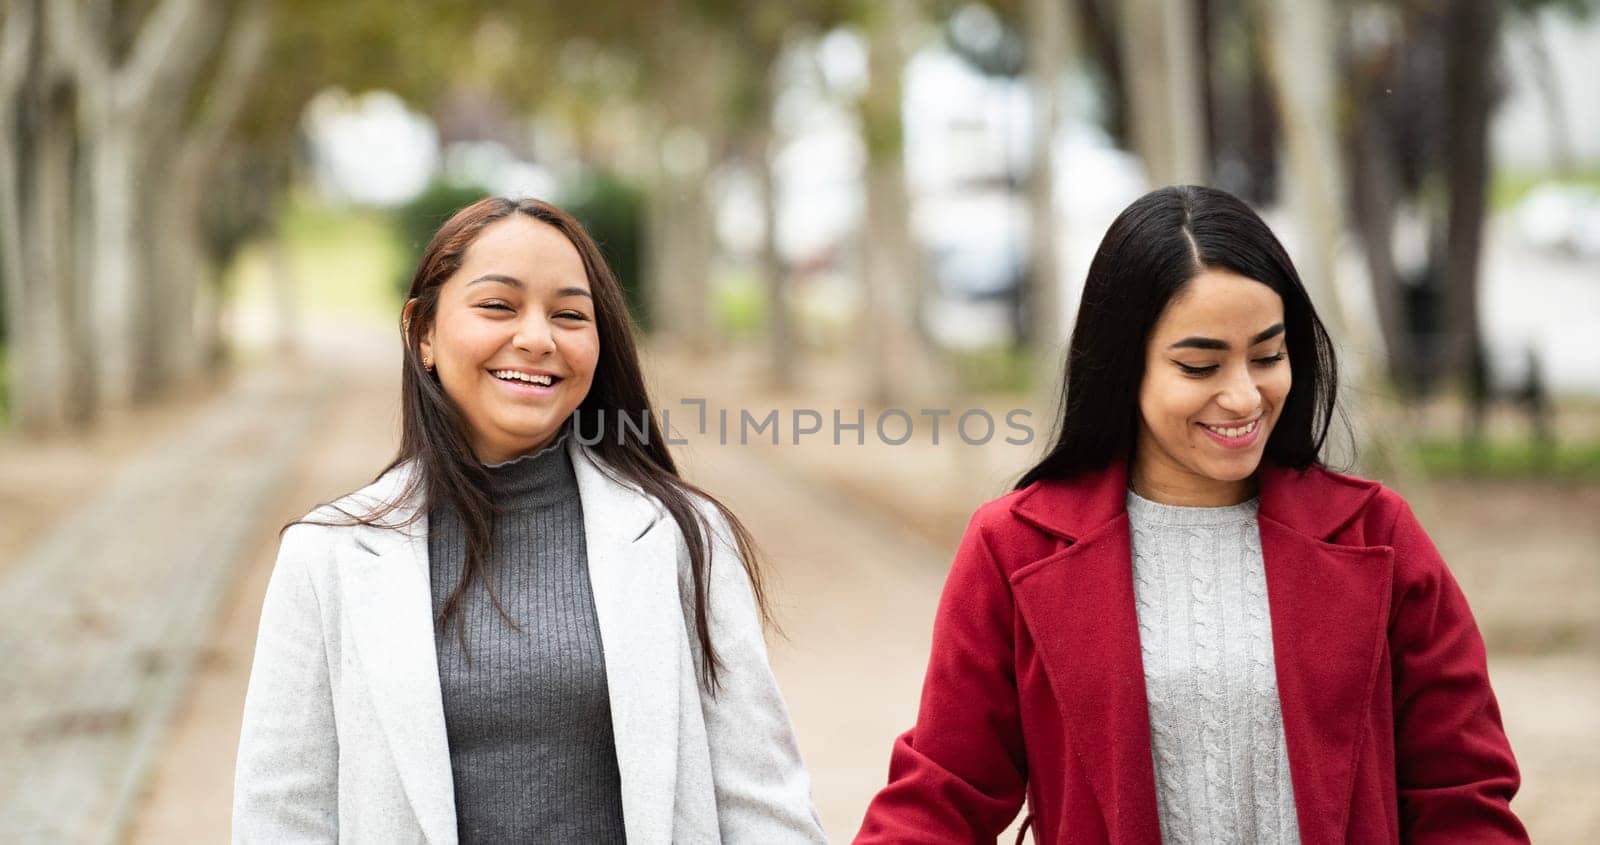 Two latin women are walking in a park smiling, laughing and enjoying their time together.